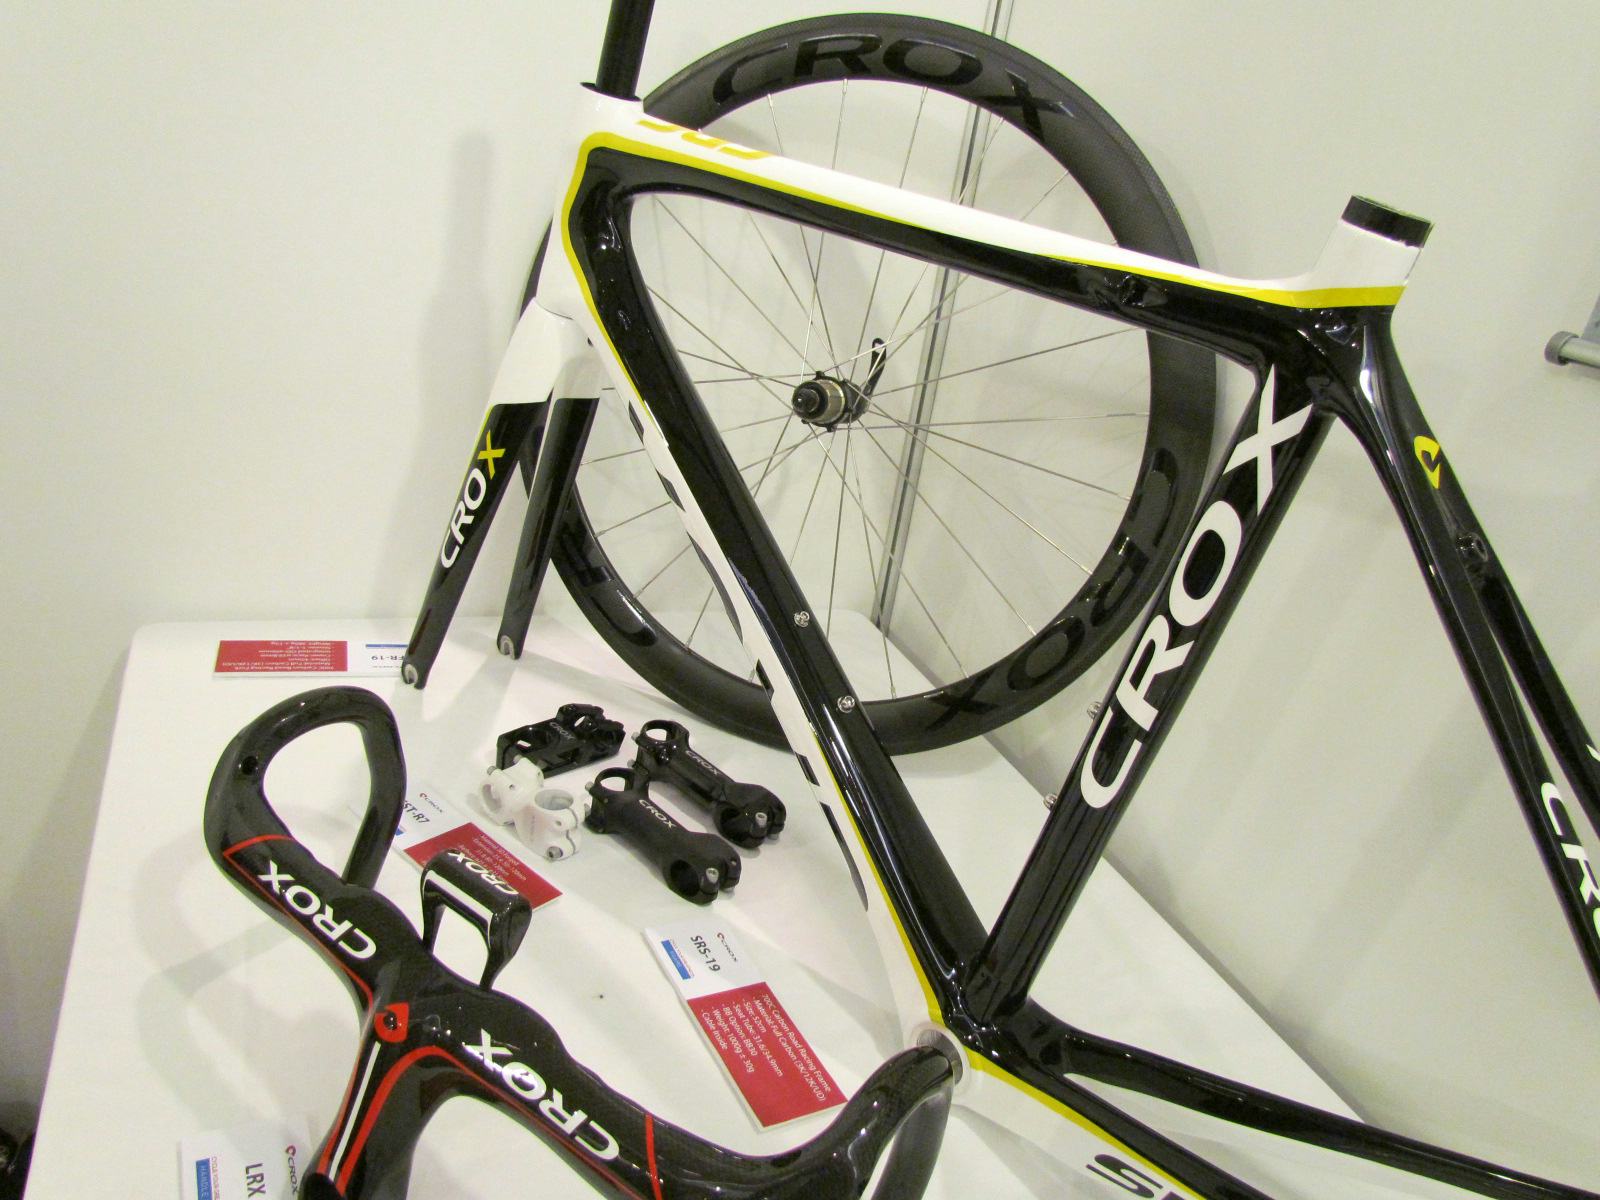 The Crox line-up as on display at Taipei Cycle features lots of carbon components.